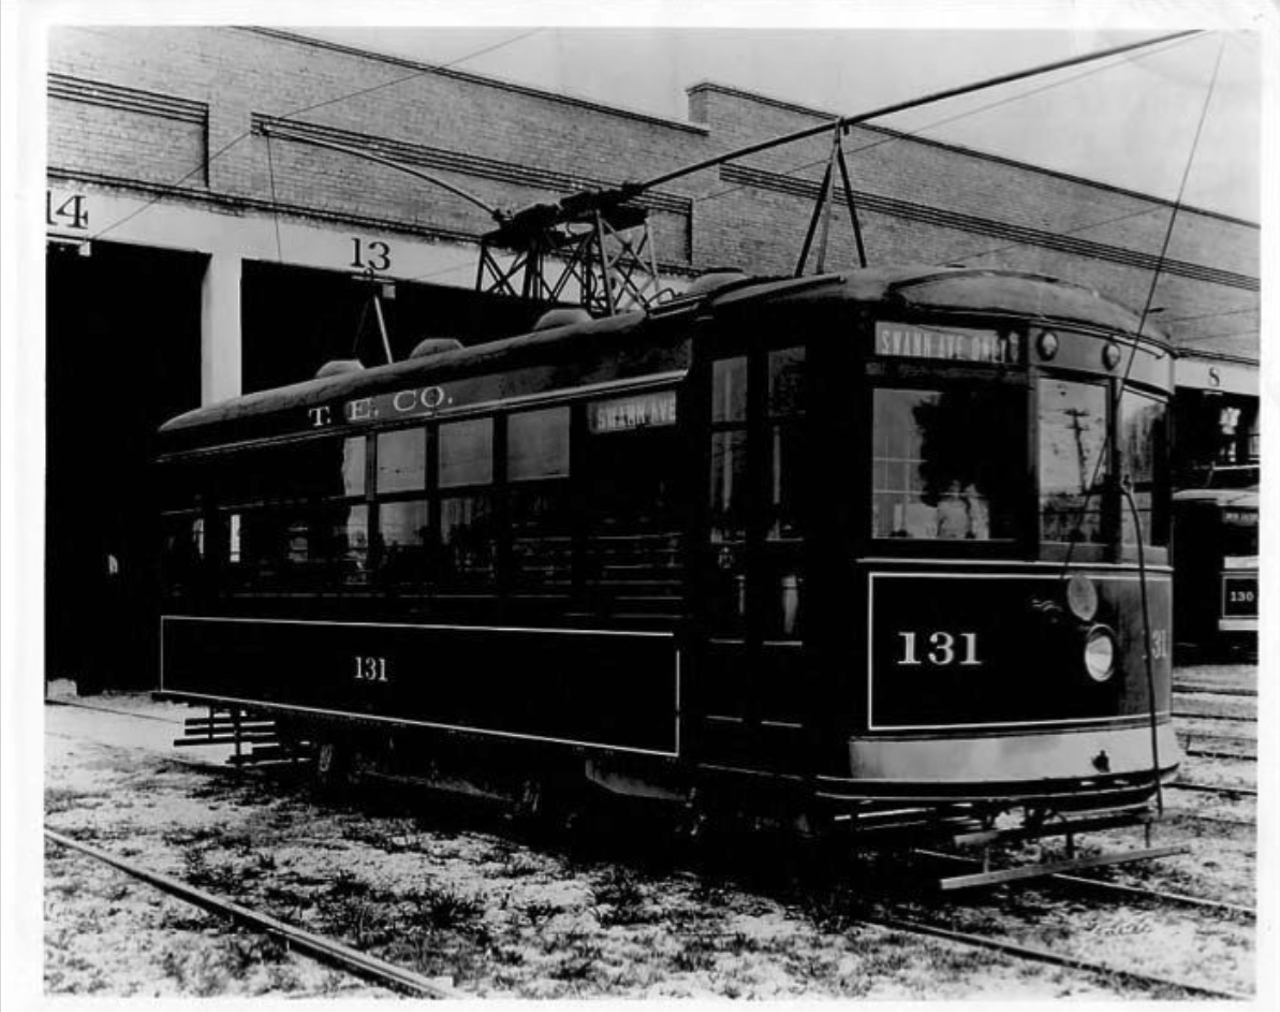 Swann Avenue Streetcar No. 131 in front of 7th Avenue car barn in Tampa, Florida in 1919.
Photo by Burgert Brothers via Tampa-Hillsborough County Public Library System